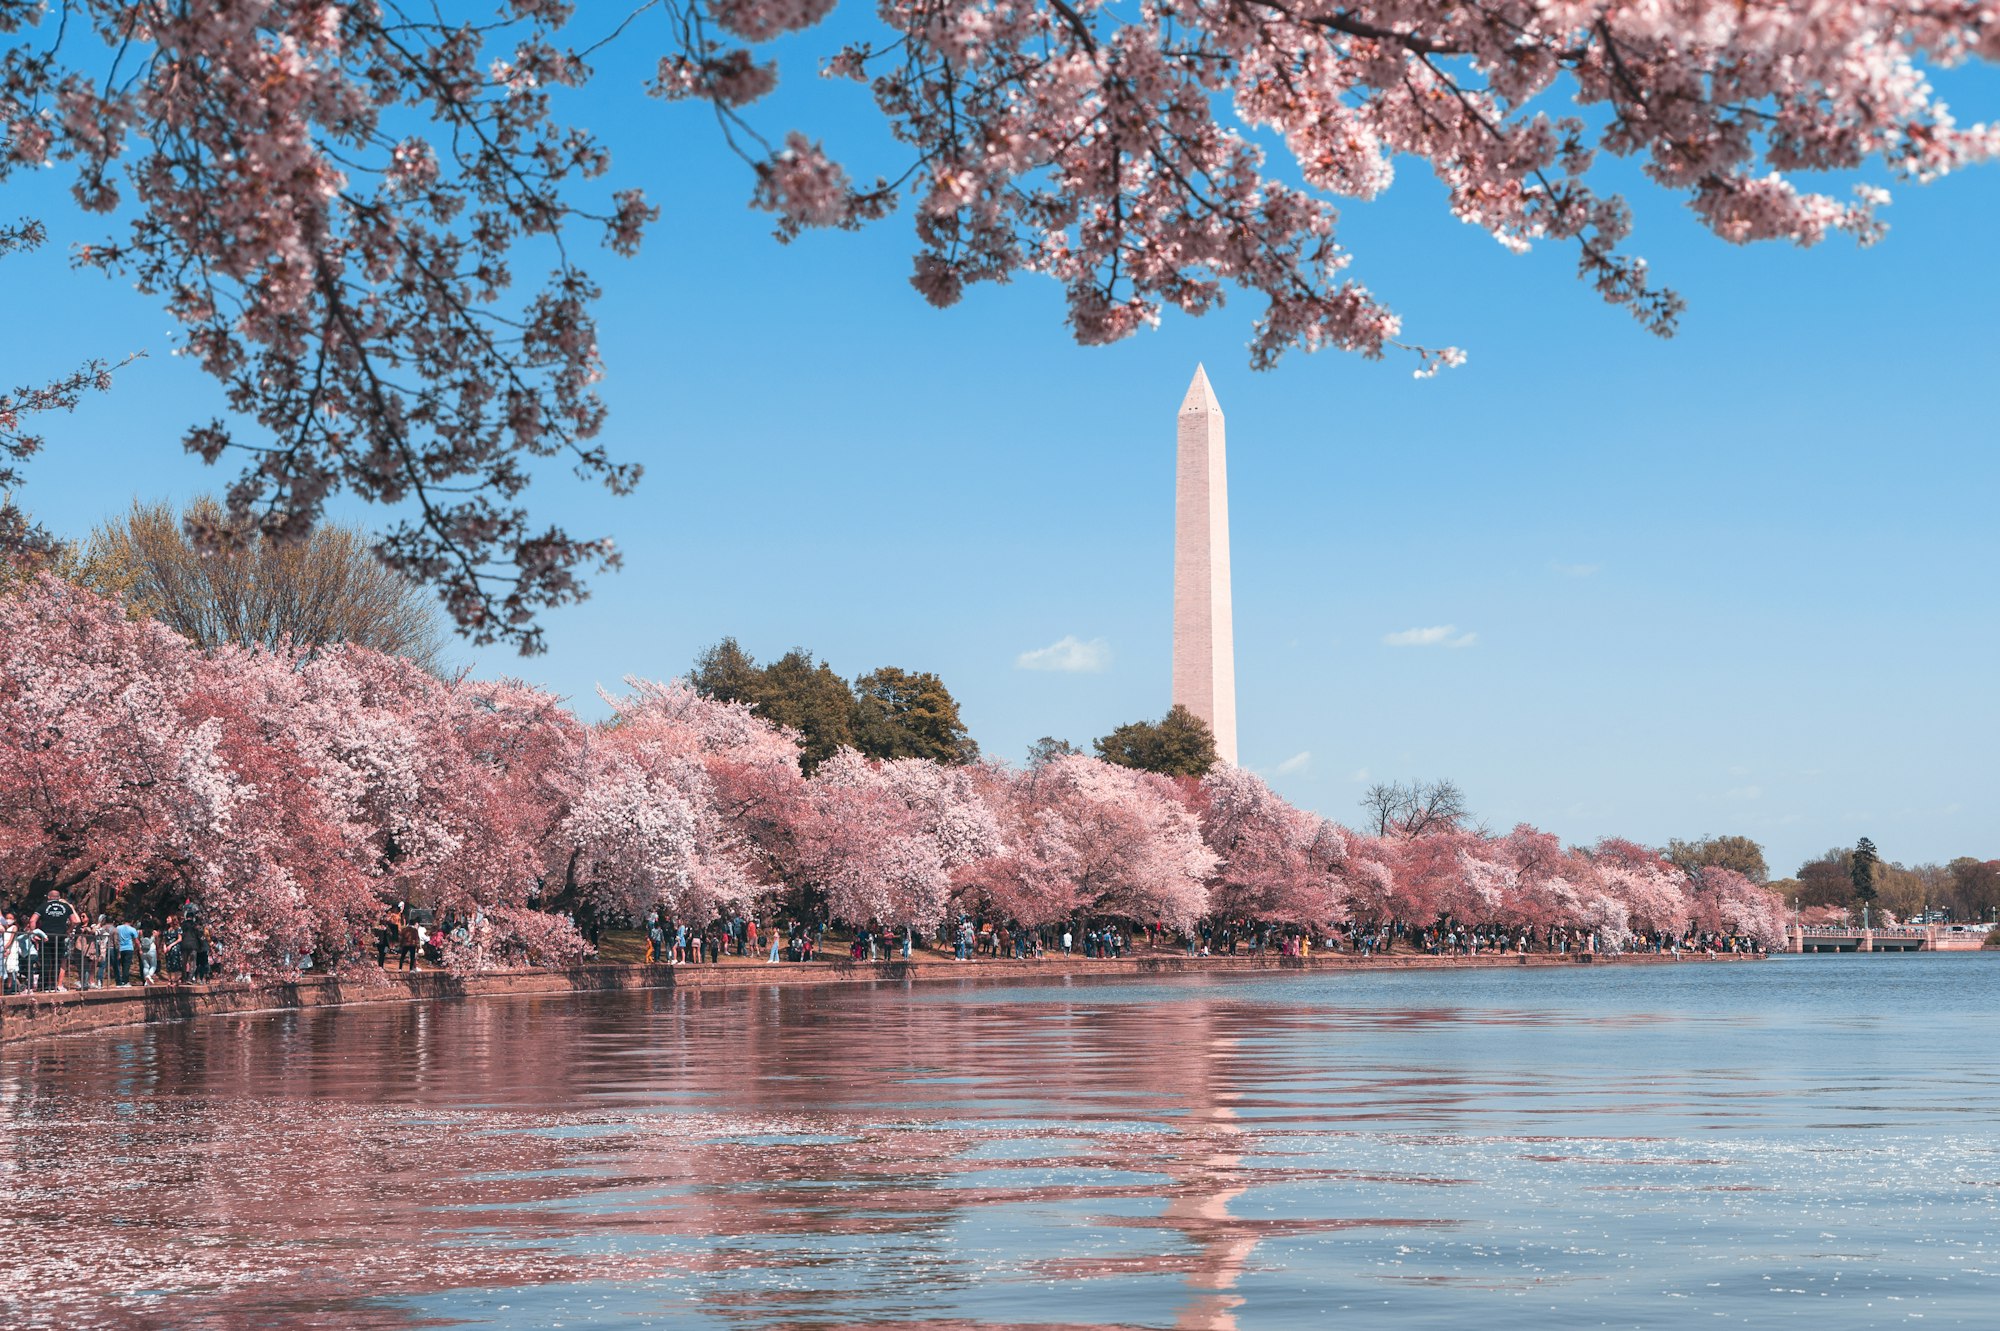 What Was The Original Purpose Of The Washington Monument?